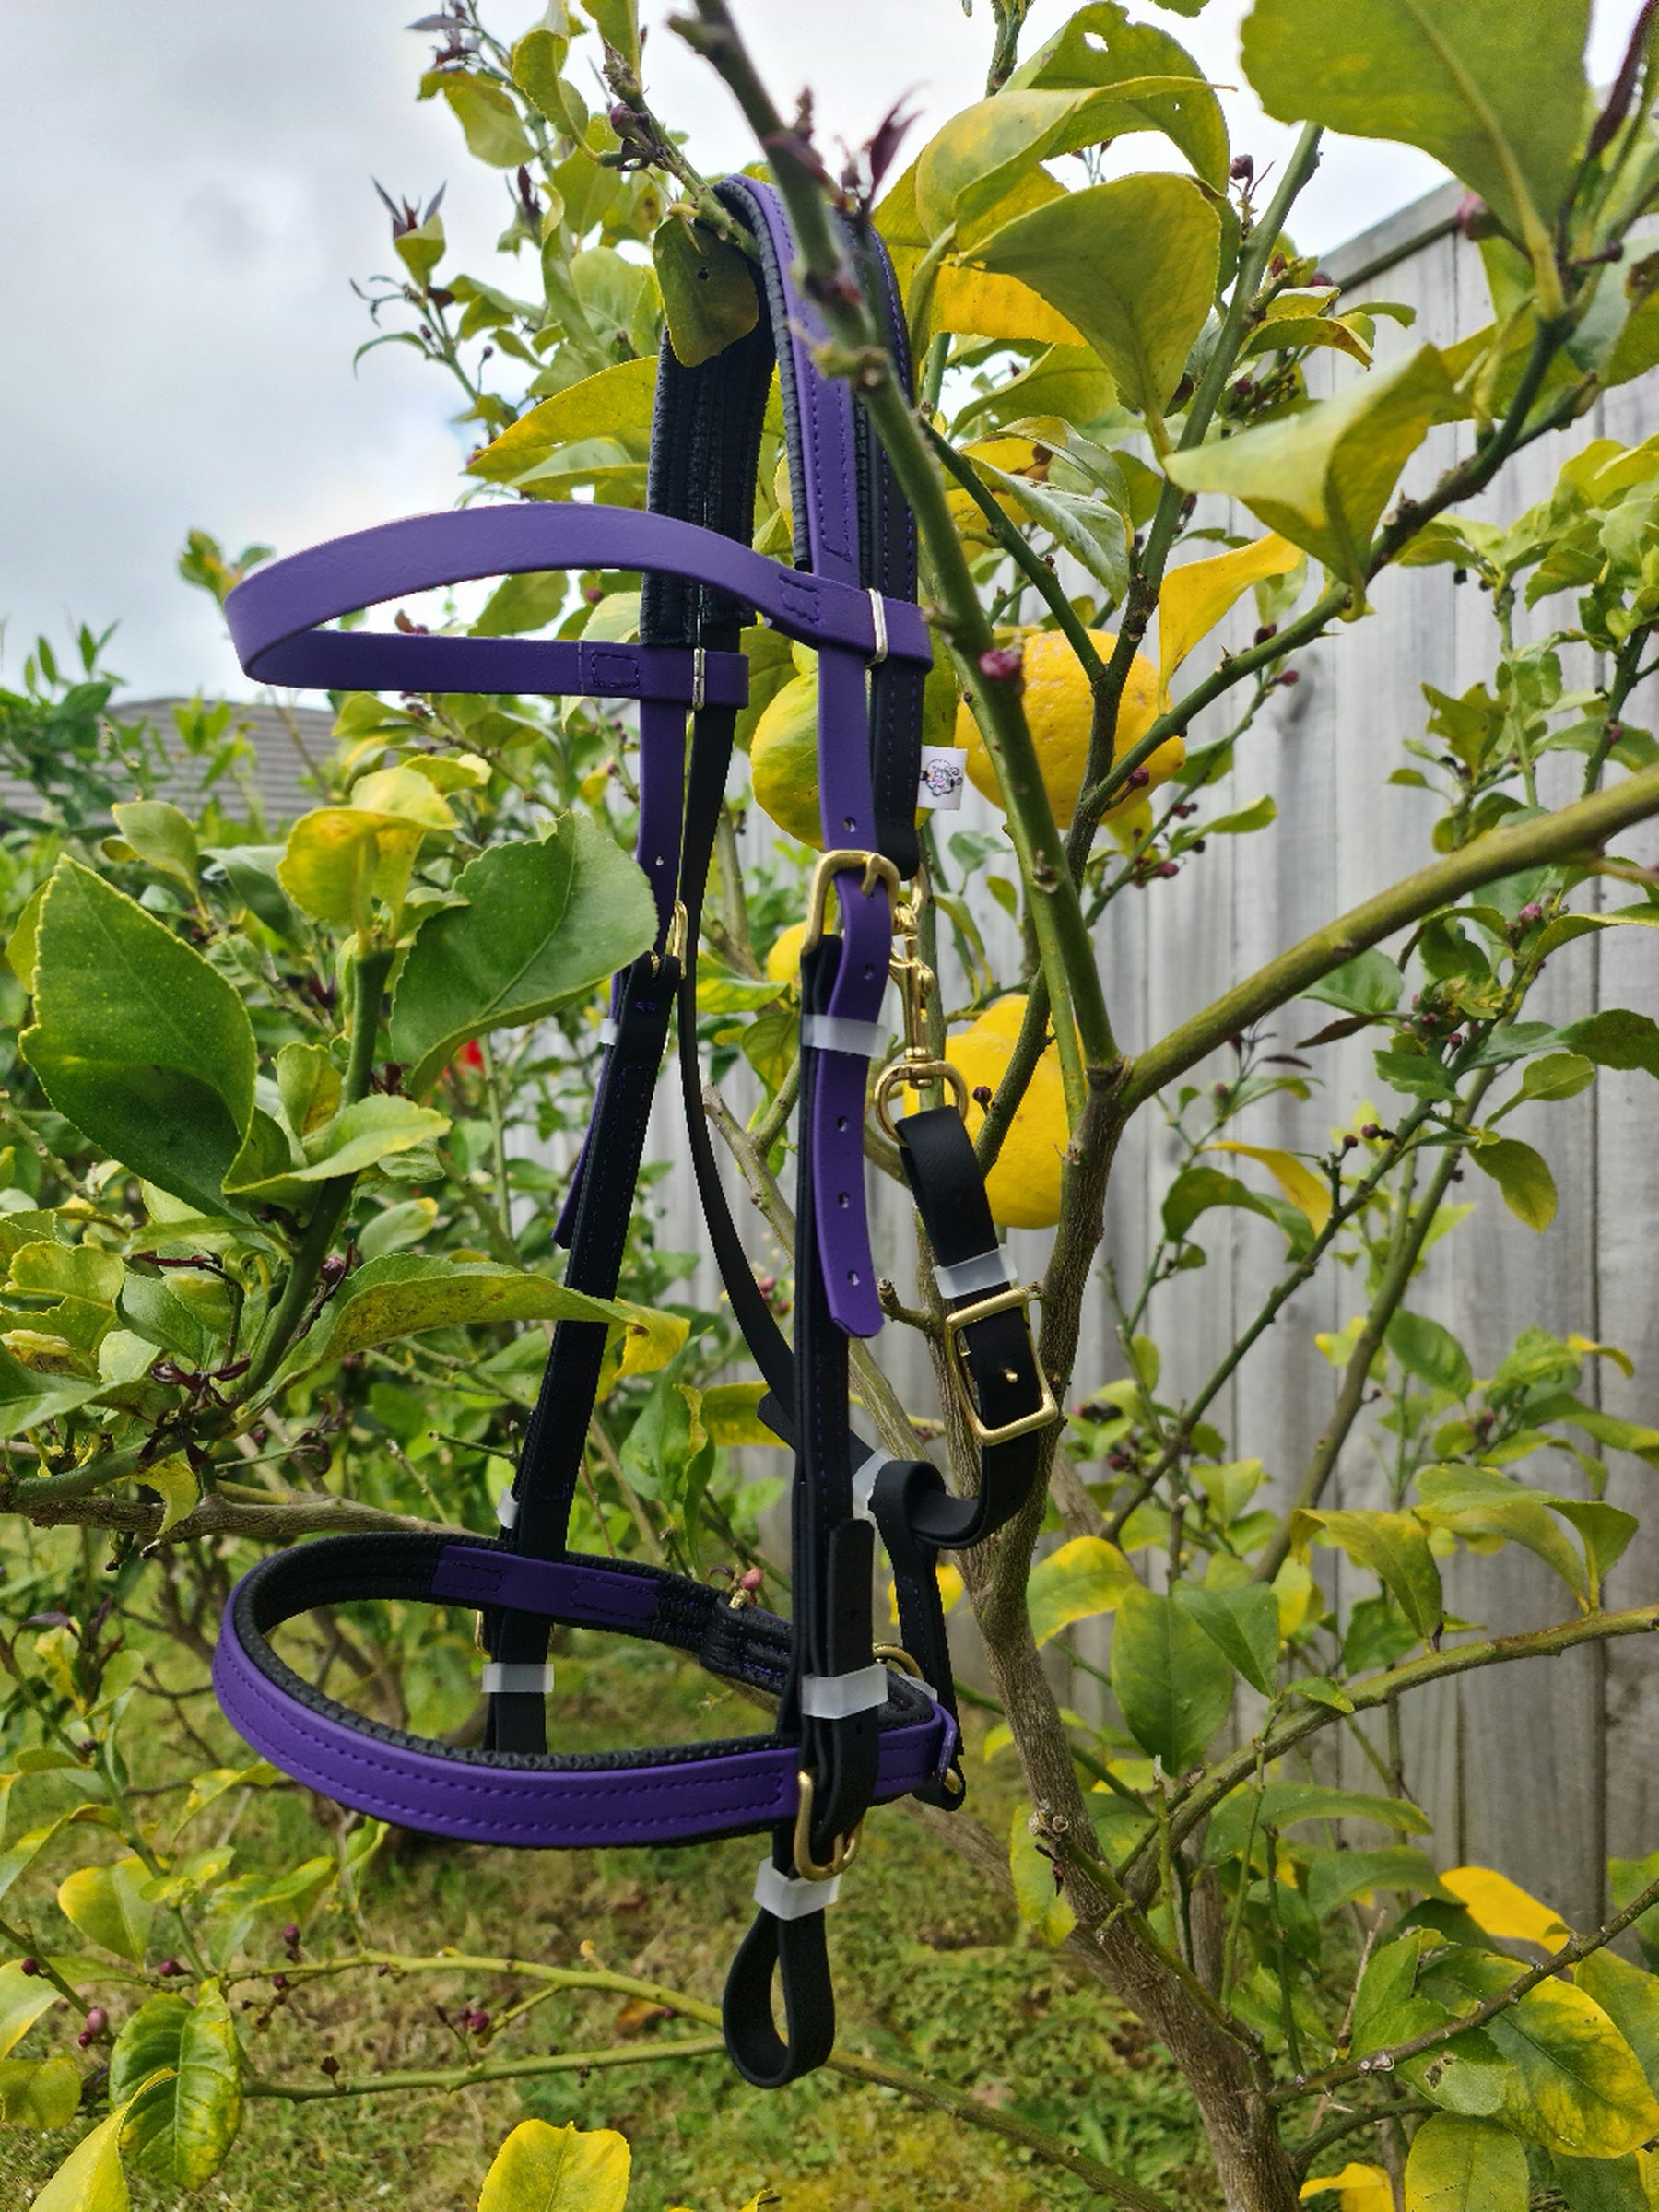 A Simplicity Bridle - Black & Violet from LS Equestrian with gold-colored buckles is hanging on the branches of a leafy lemon tree. The bright yellow lemons and green foliage provide a contrasting background to the equestrian equipment. A cloudy sky and a portion of a wooden fence are also visible.